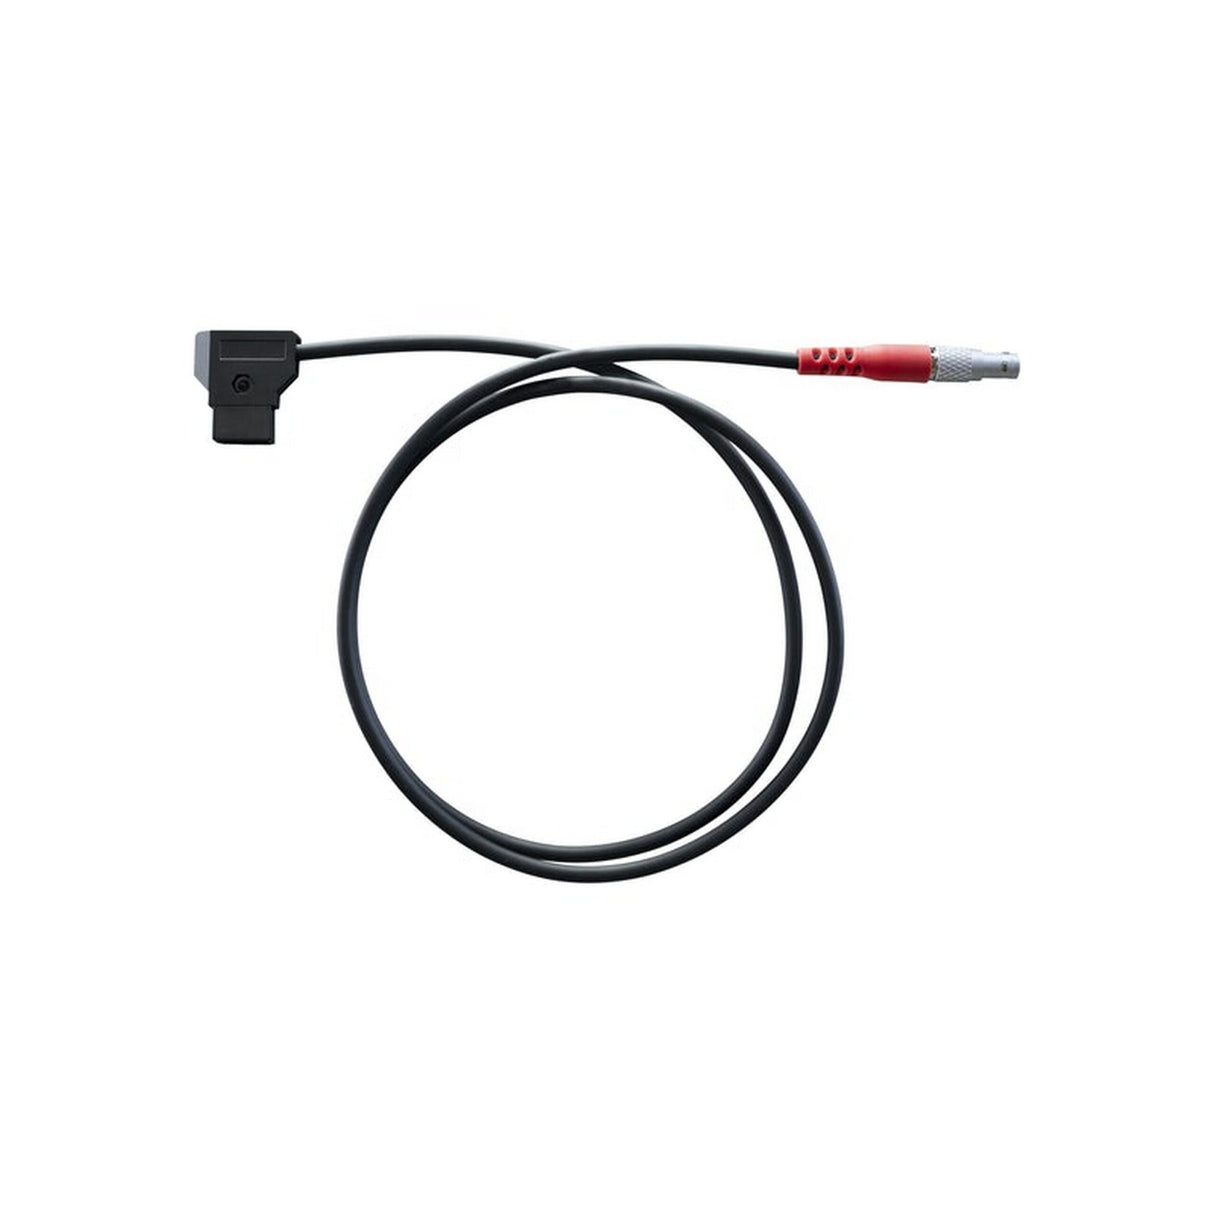 SmallHD D-Tap to 2-Pin Power Cable, 36 Inch, 17-3000